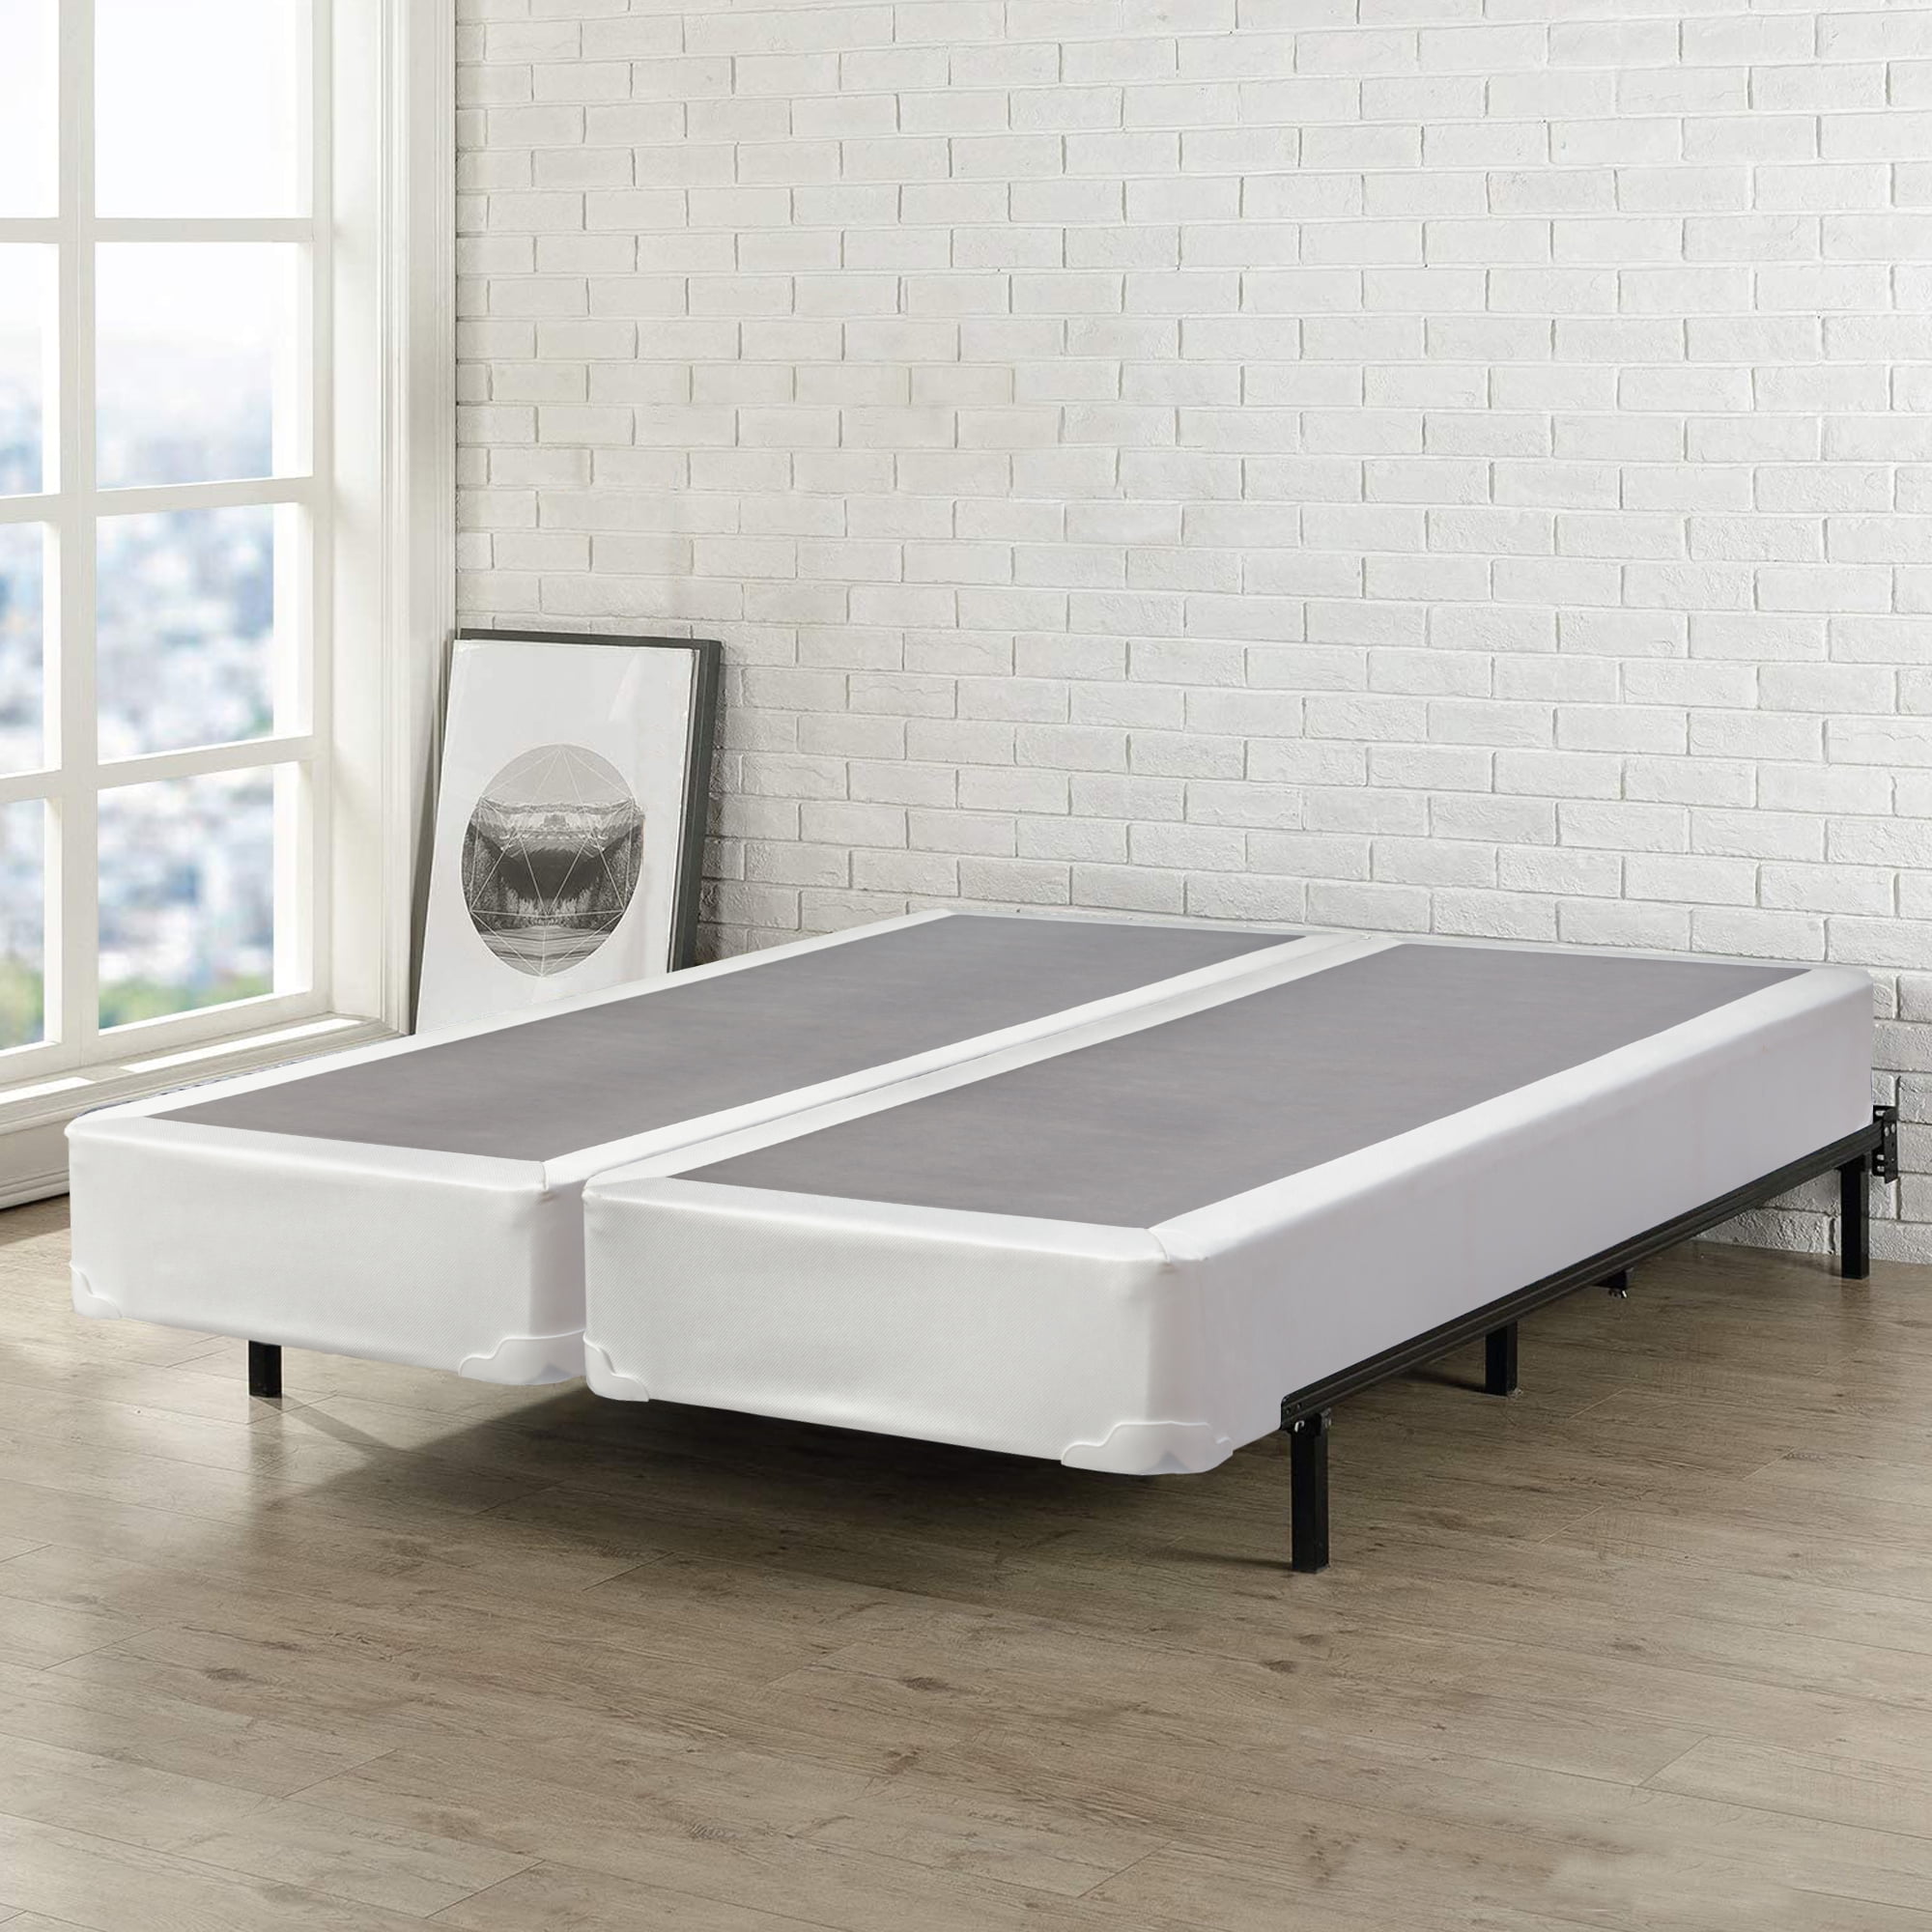 Box Spring 7.5 Metal Bed Mattress Foundation Folding Twin Full Queen King Size 